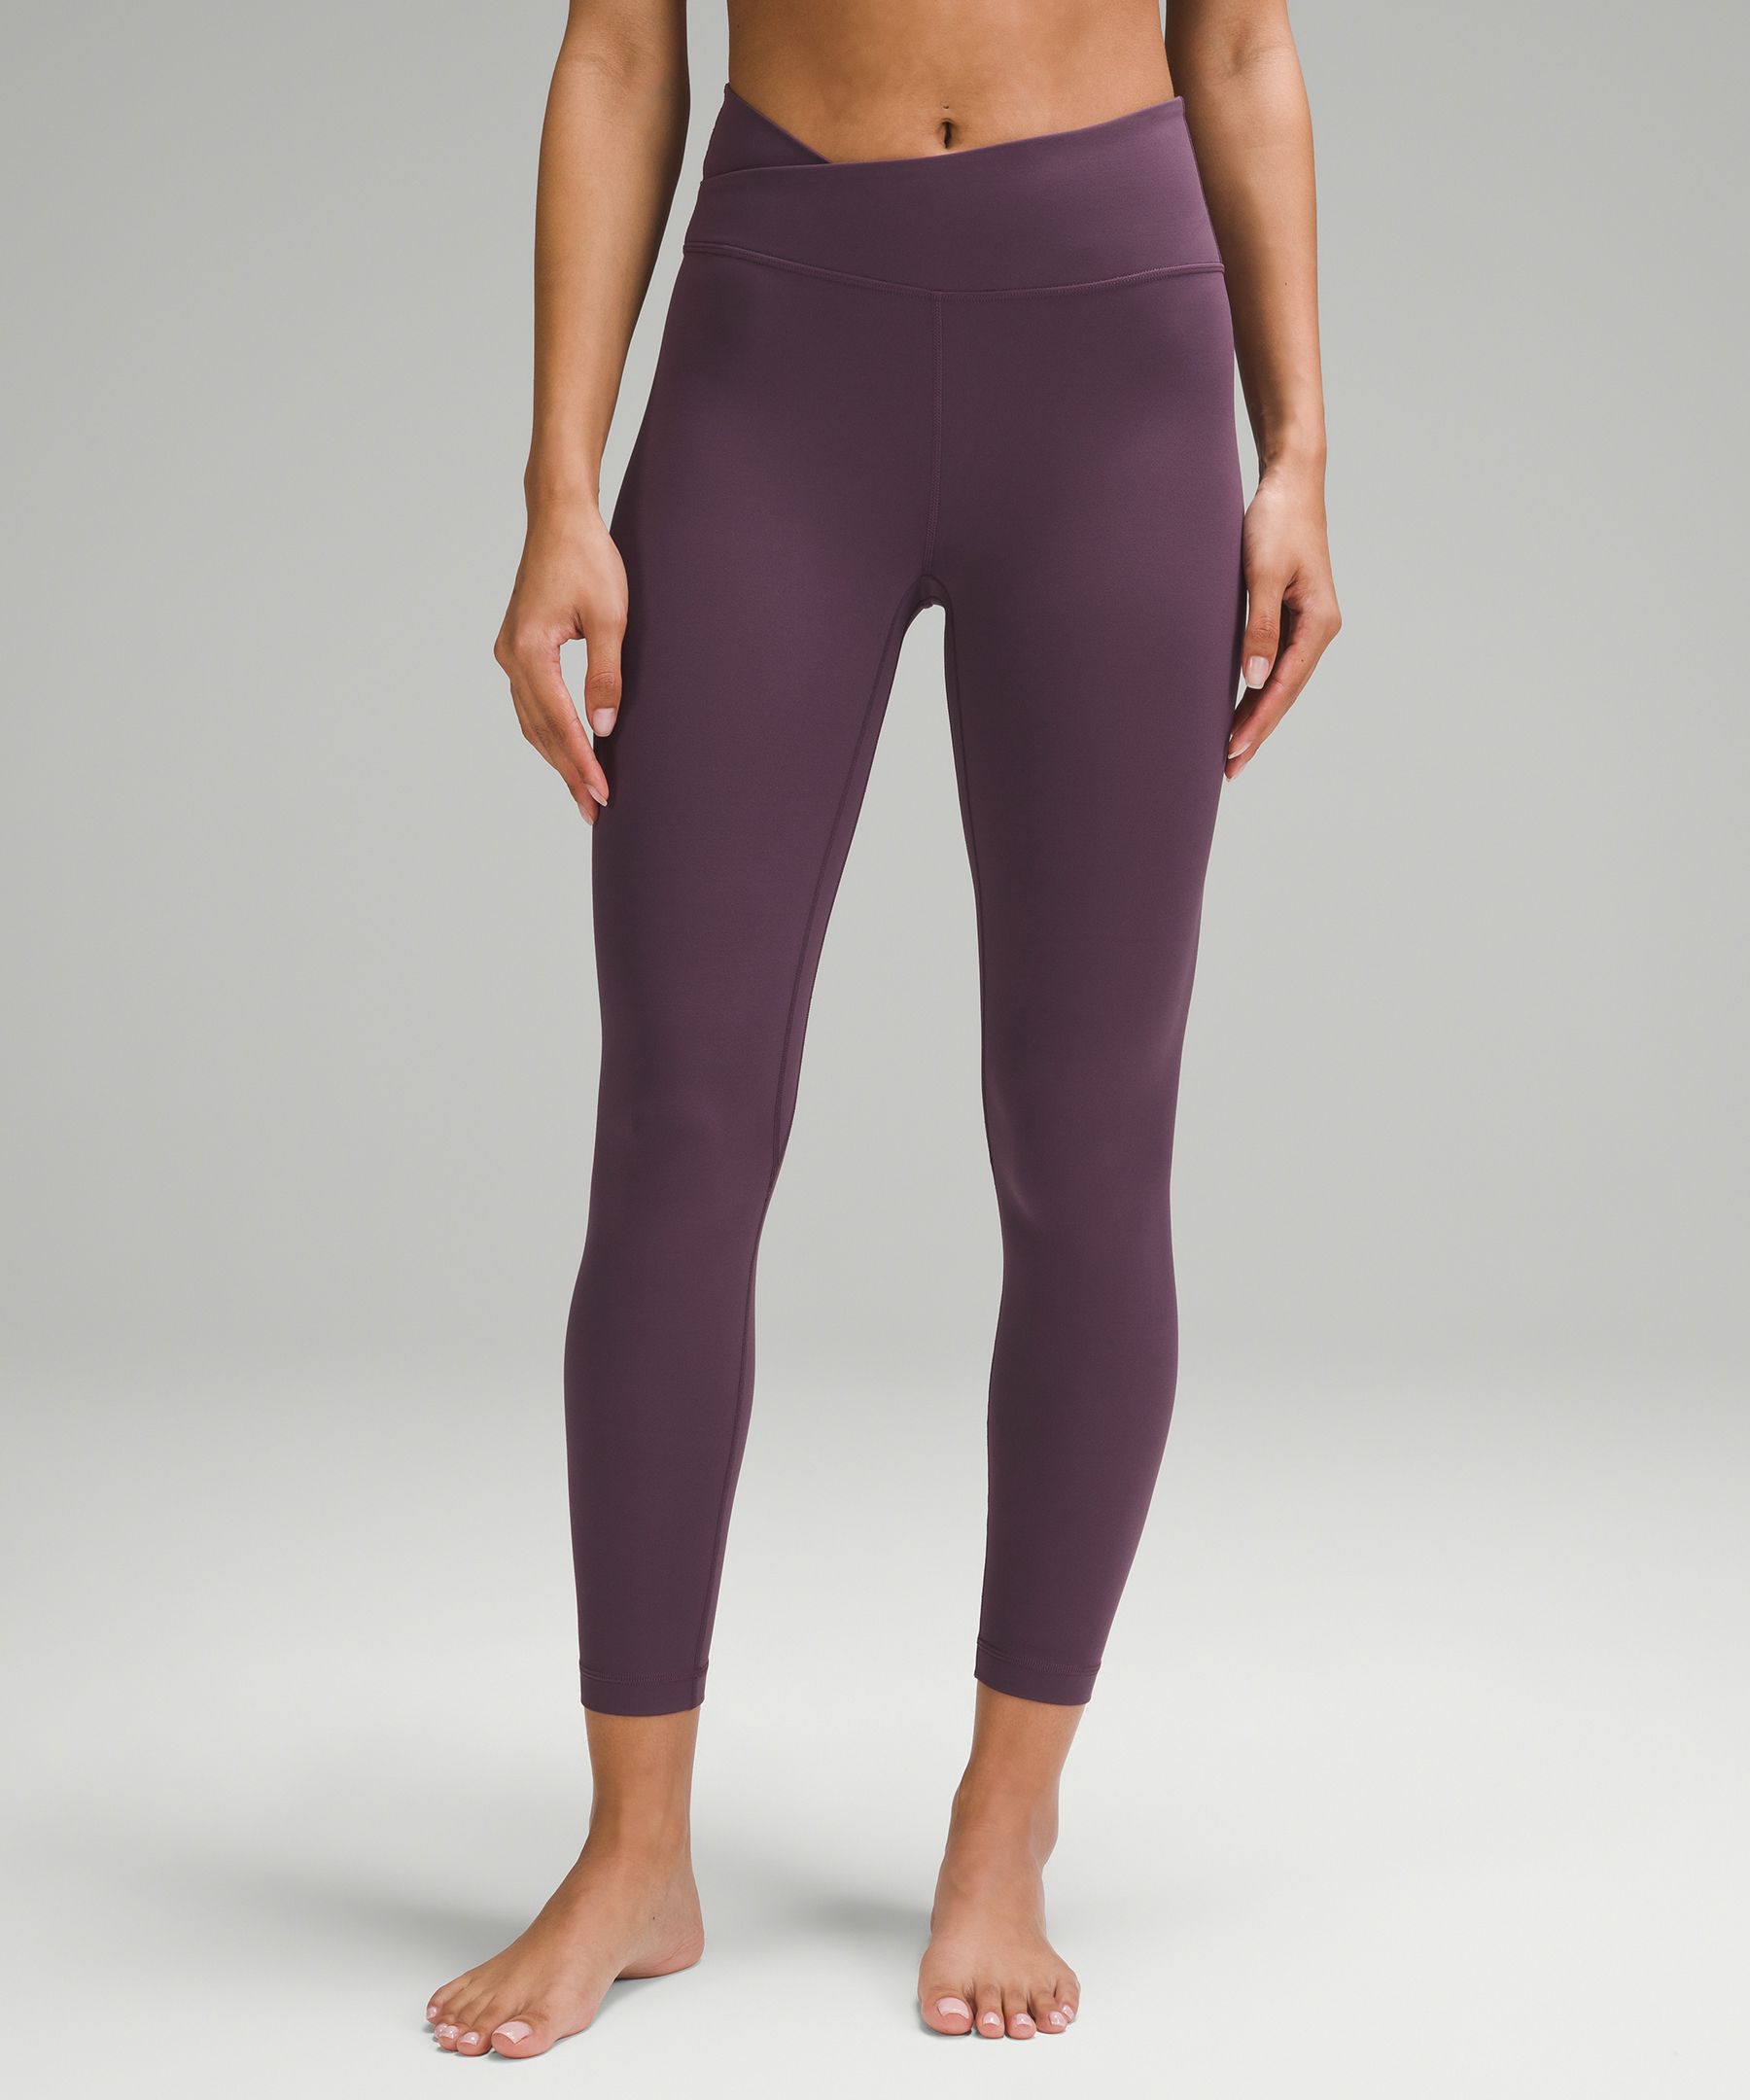 Lululemon Align Ribbed Leggings Size 6 - $50 (57% Off Retail) - From Ryleigh